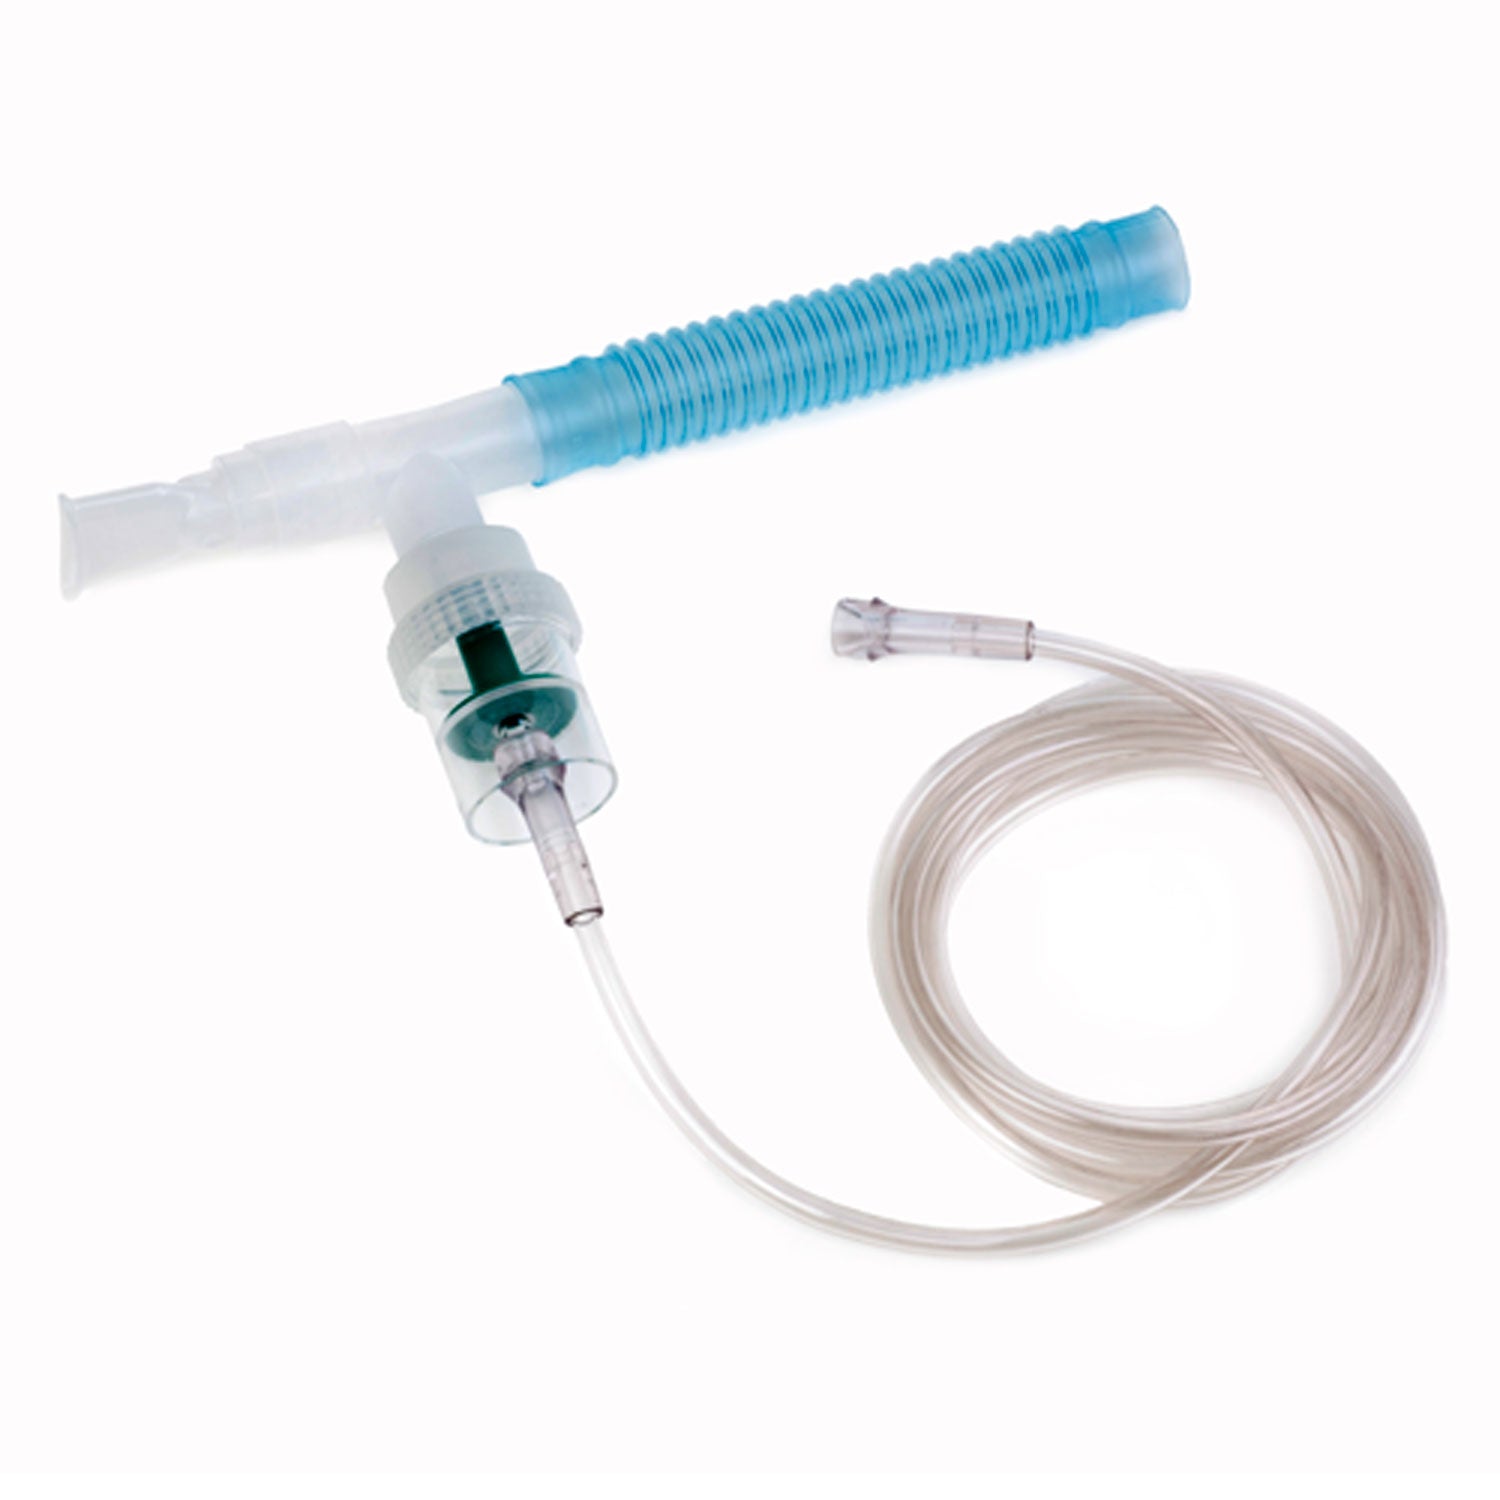 Nebulizer cup, insert, cap and mouthpiece –